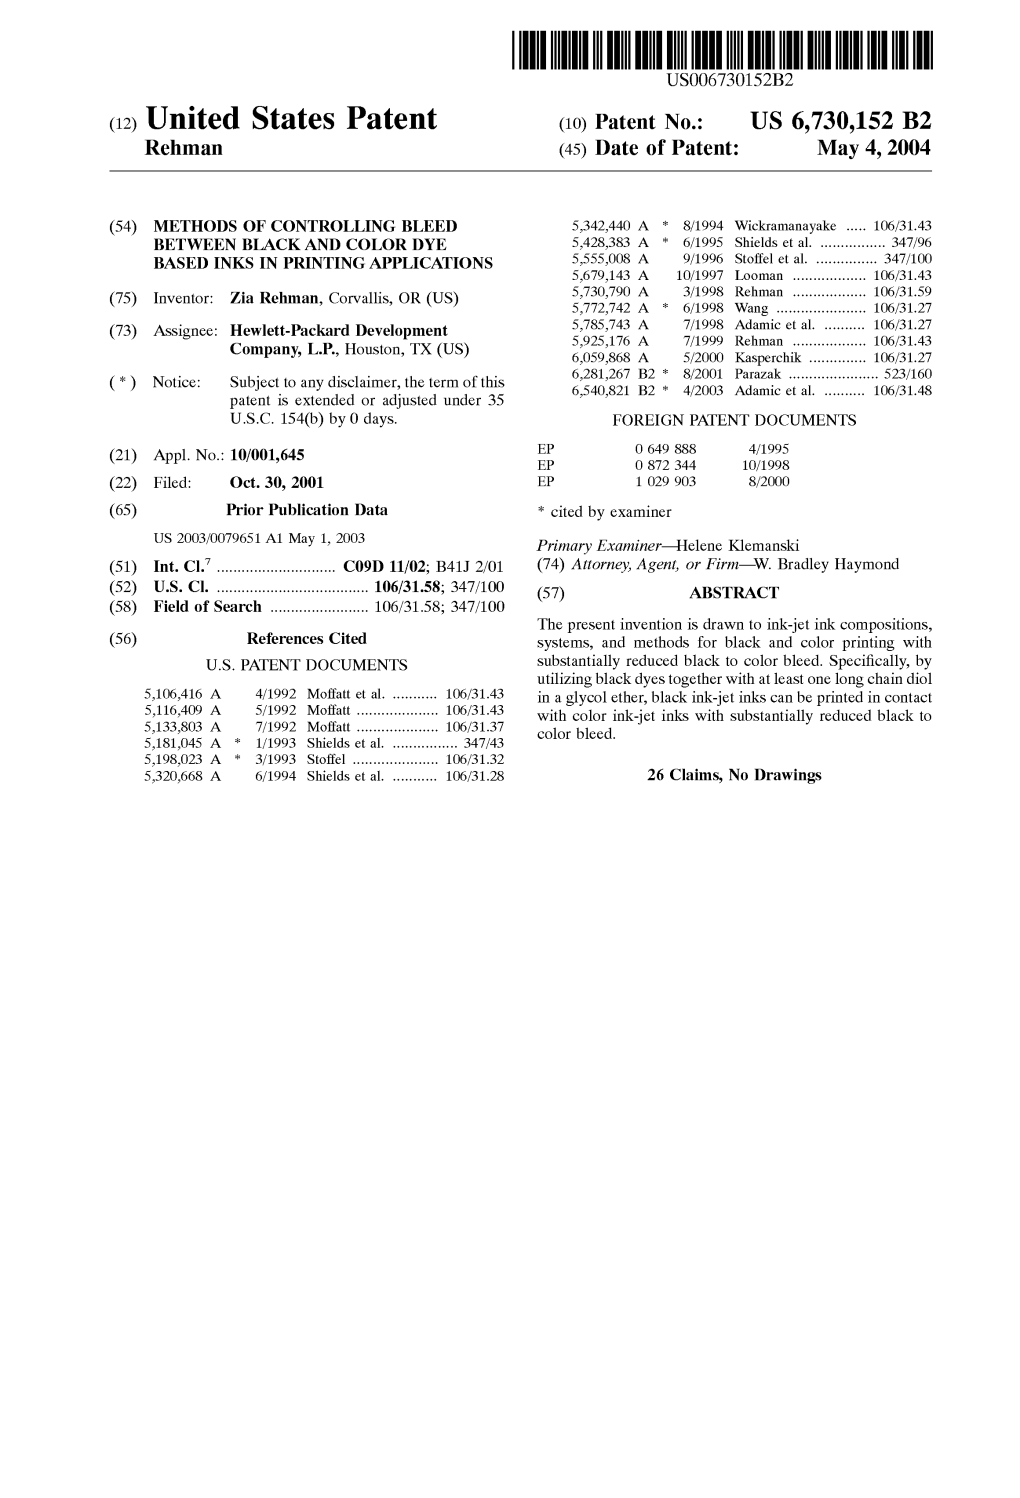 (12) United States Patent (10) Patent No.: US 6,730,152 B2 Rehman (45) Date of Patent: May 4, 2004